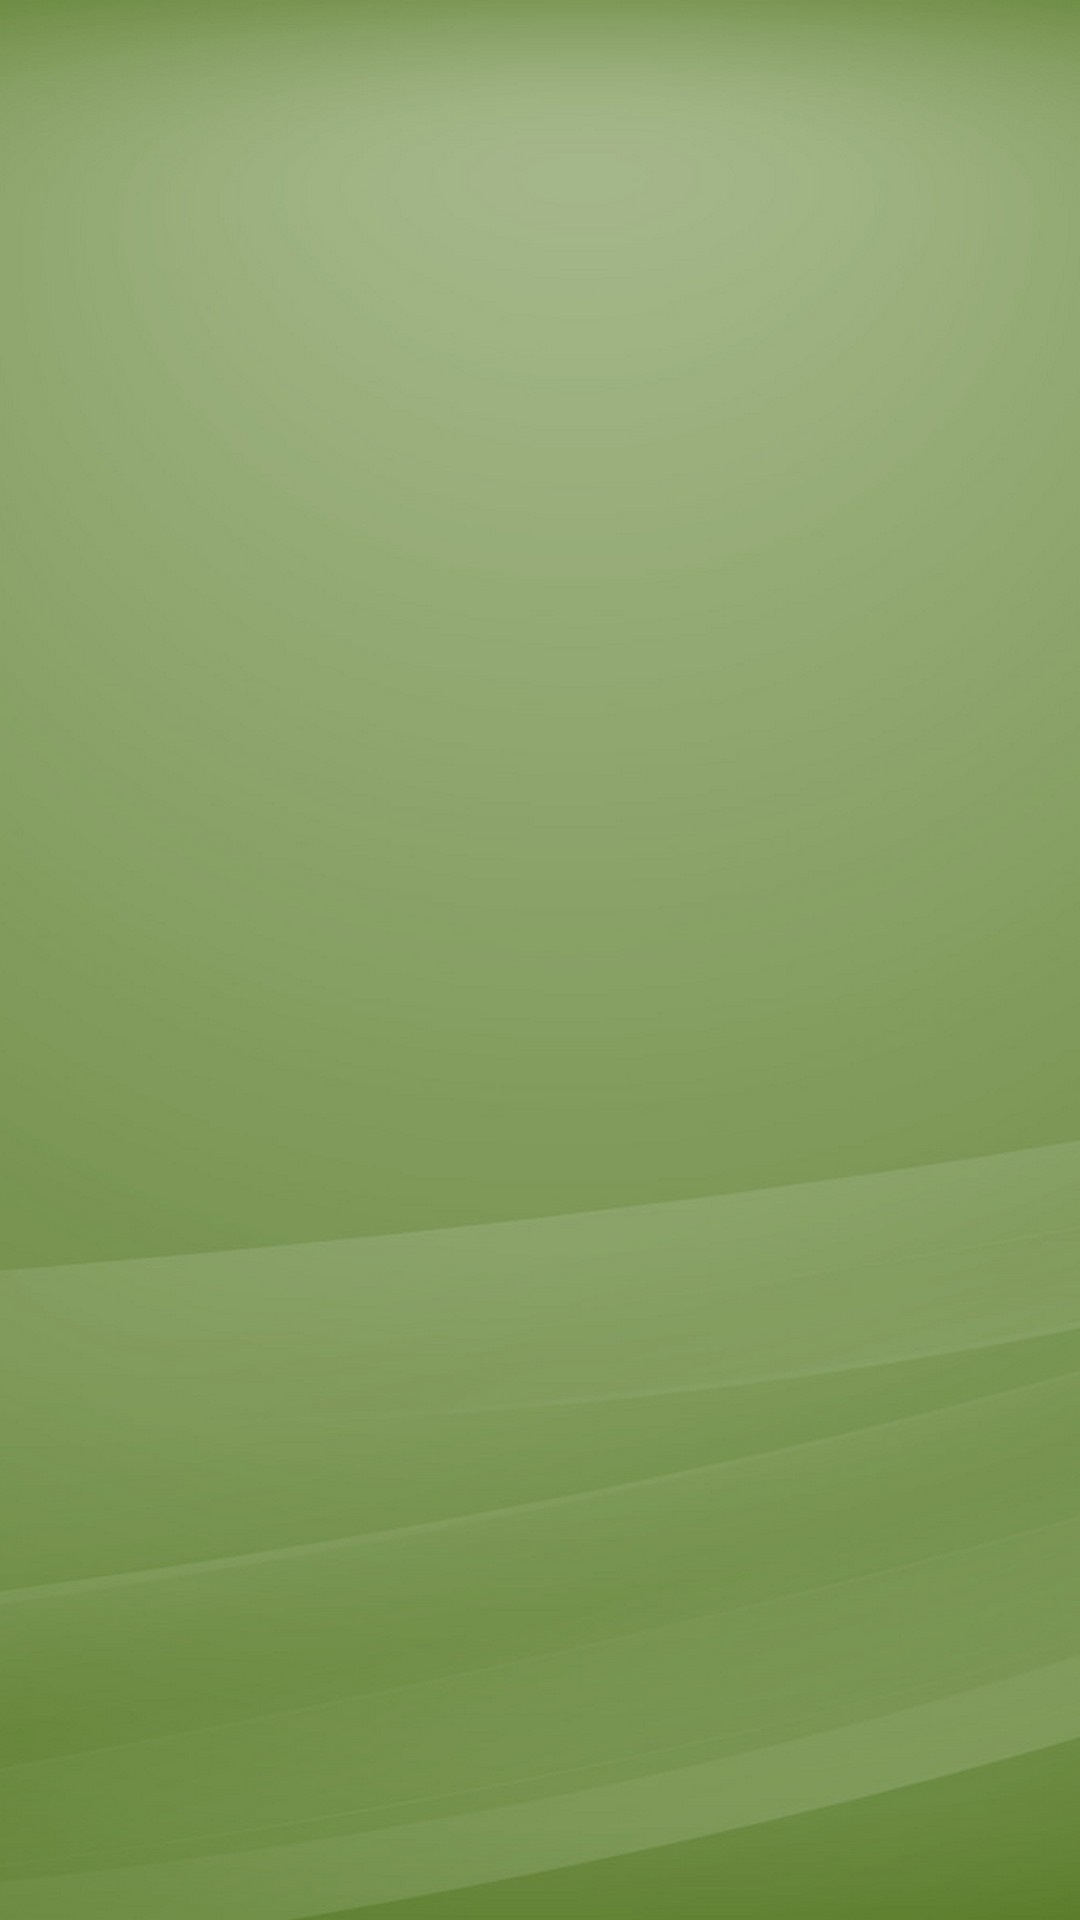 iPhone X Wallpaper Green Colour with image resolution 1080x1920 pixel. You can make this wallpaper for your iPhone 5, 6, 7, 8, X backgrounds, Mobile Screensaver, or iPad Lock Screen